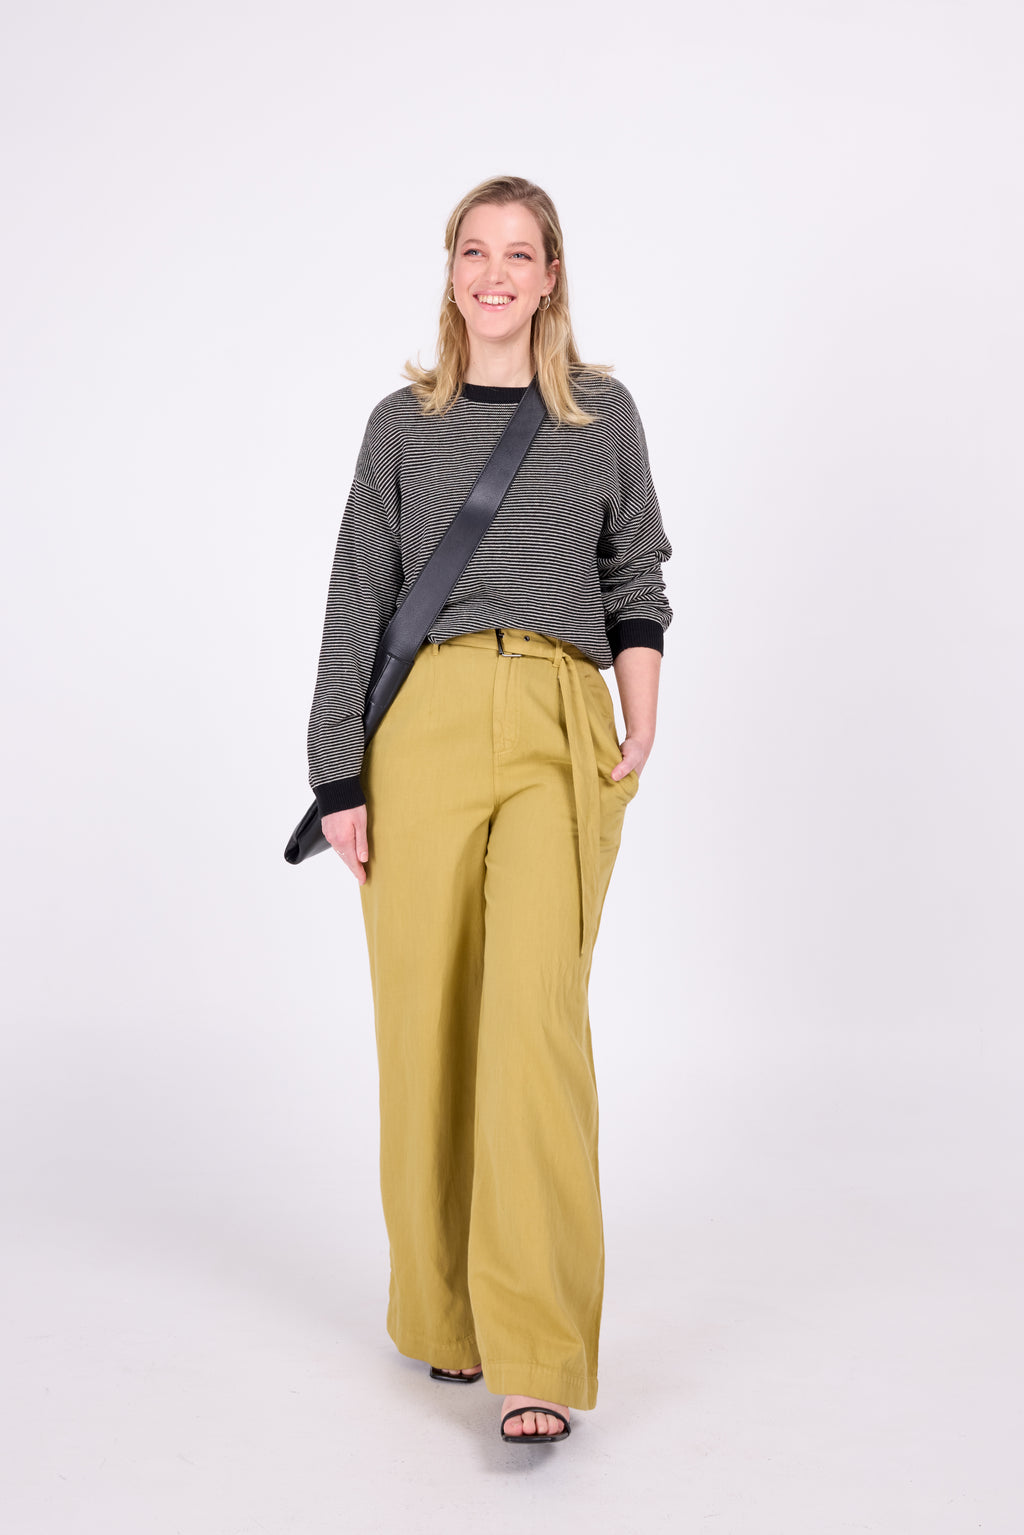 Dounia olive trousers